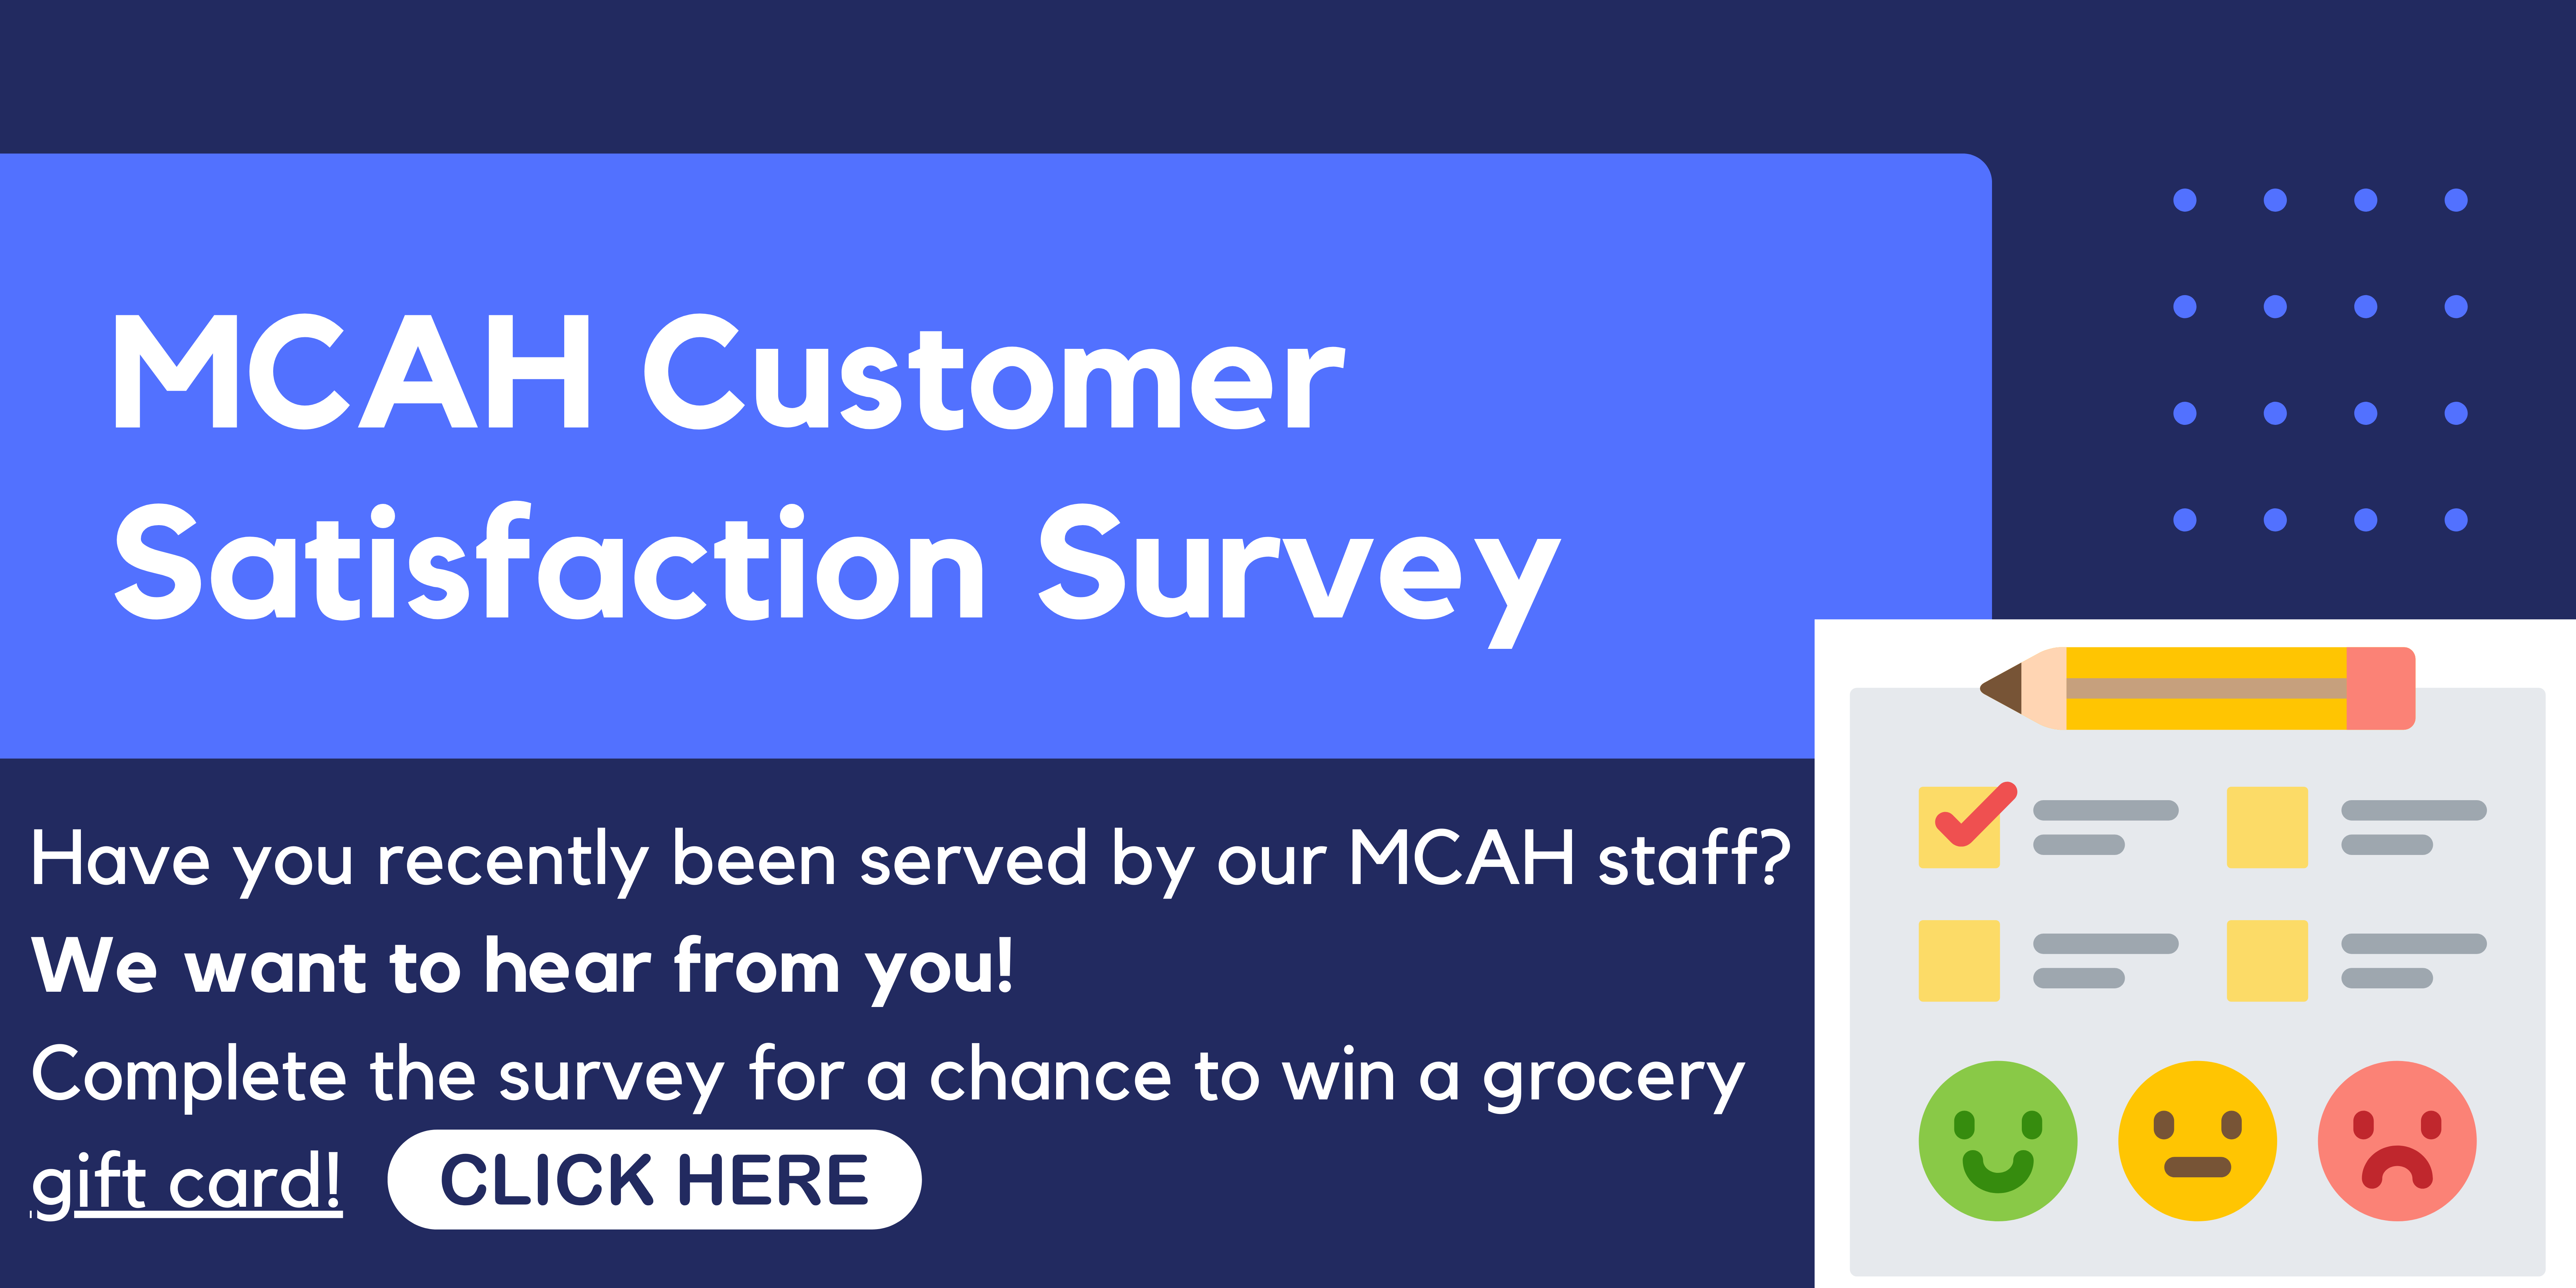 MCAH Customer Satisfaction Survey: Have you recently been served by our Maternal Child and Adolescent Health Services staff? We want to hear from you! Complete the survey for a chance to win a grocery gift card